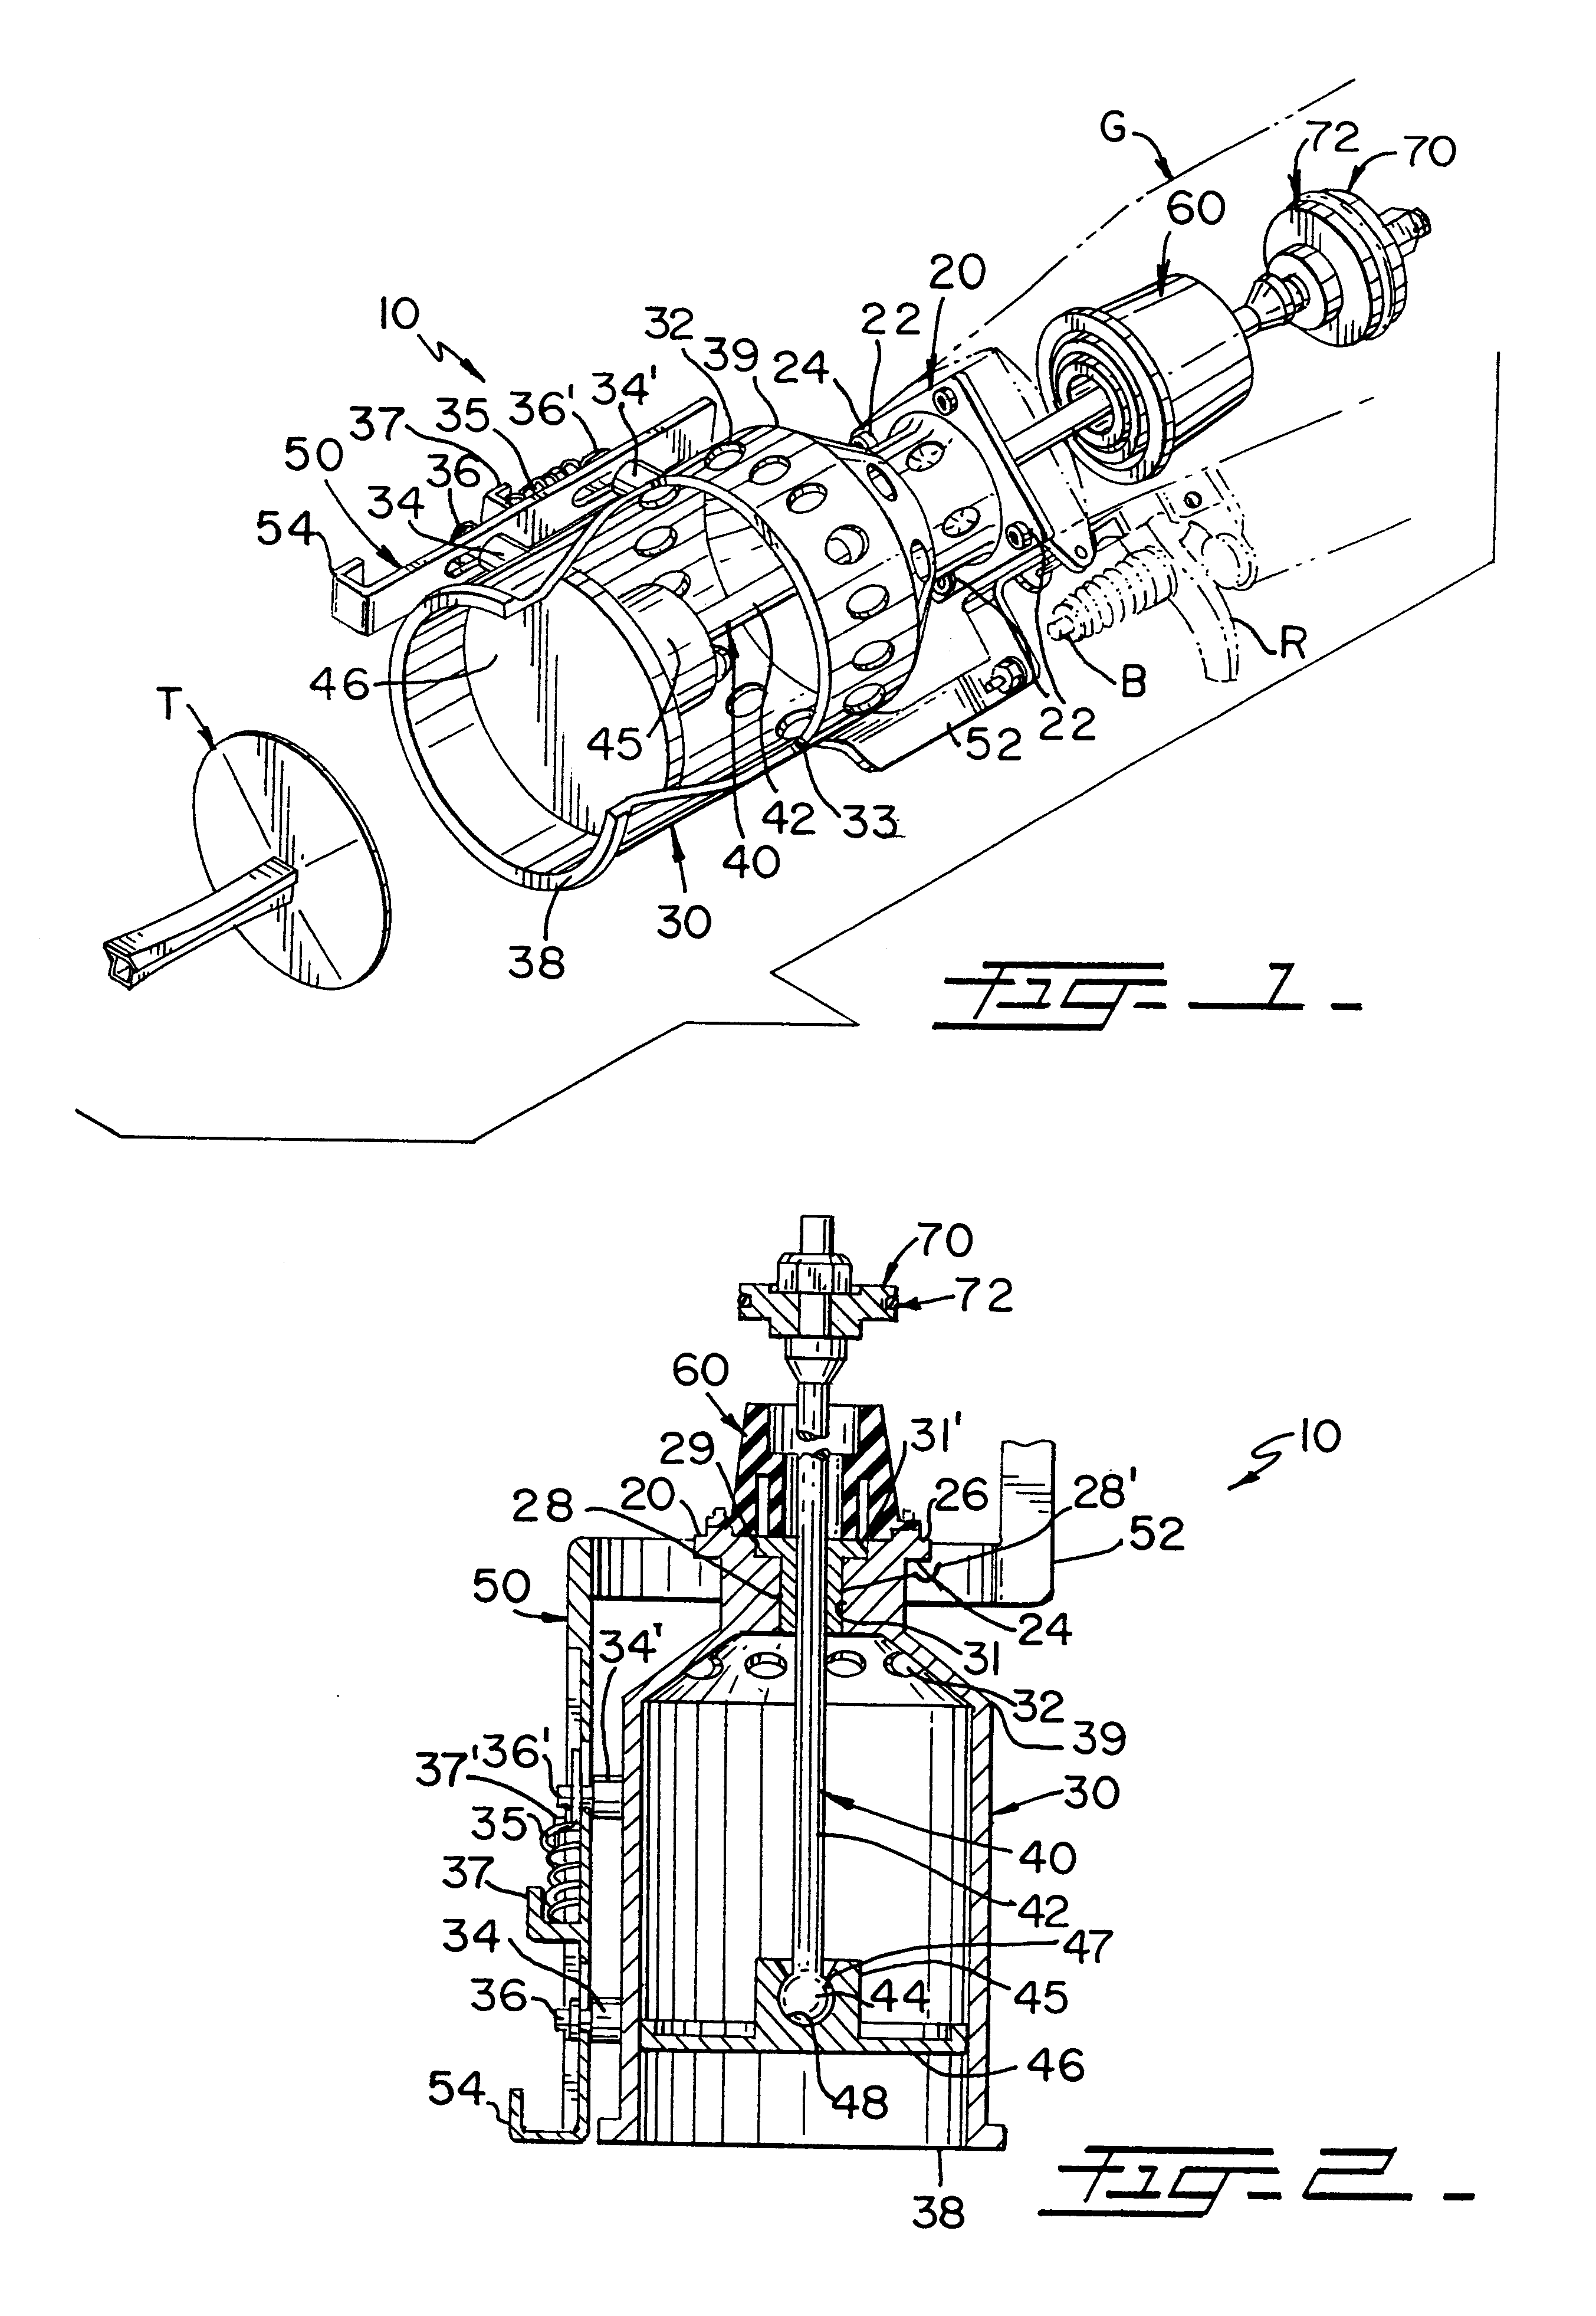 Device for nailing base sheet fasteners